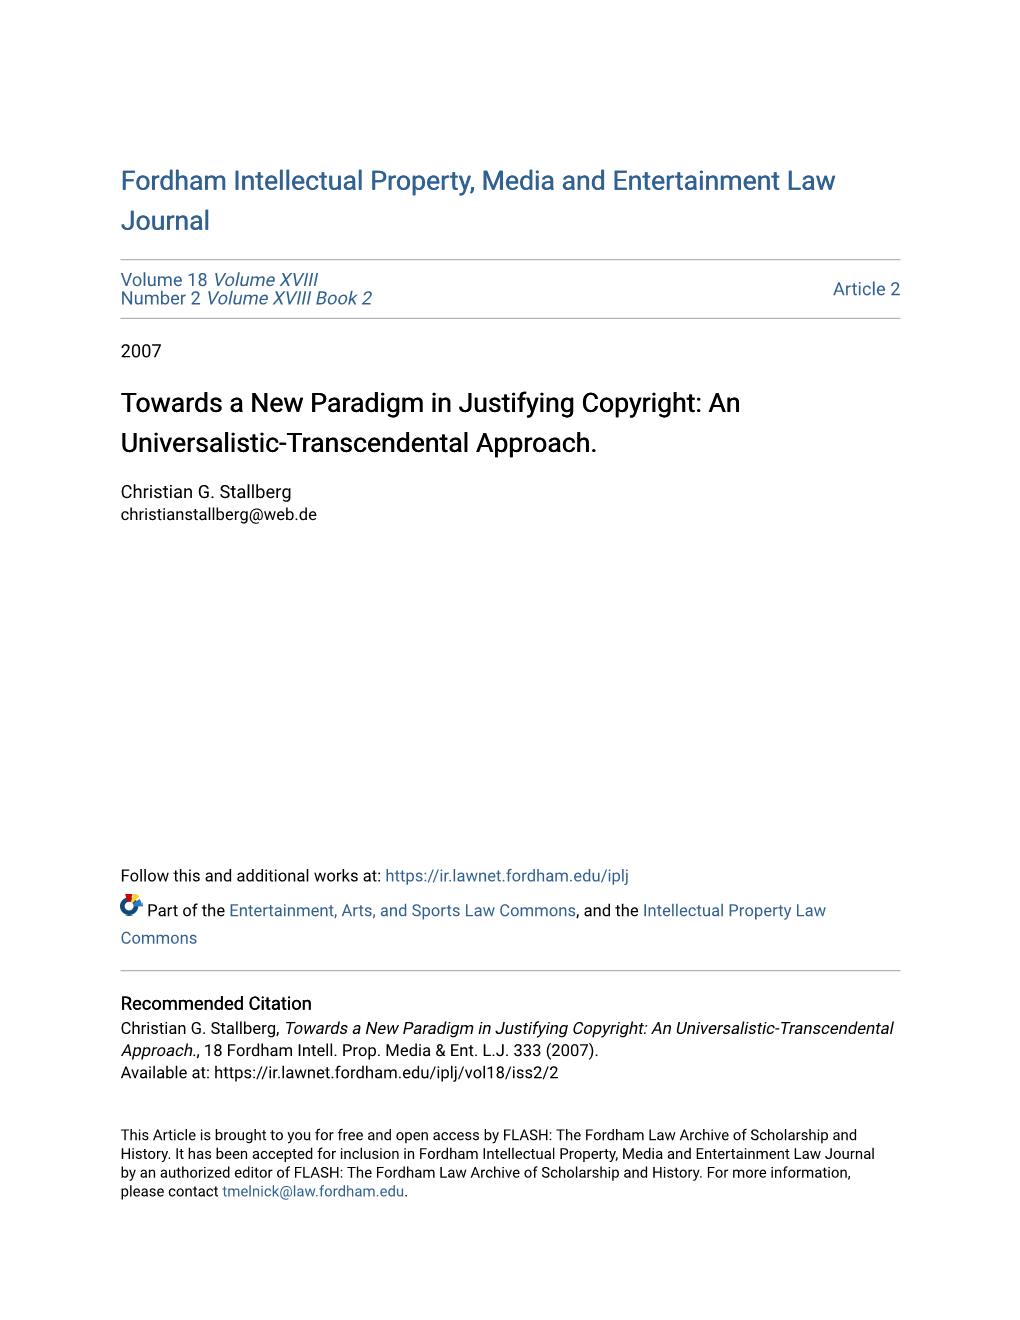 Towards a New Paradigm in Justifying Copyright: an Universalistic-Transcendental Approach